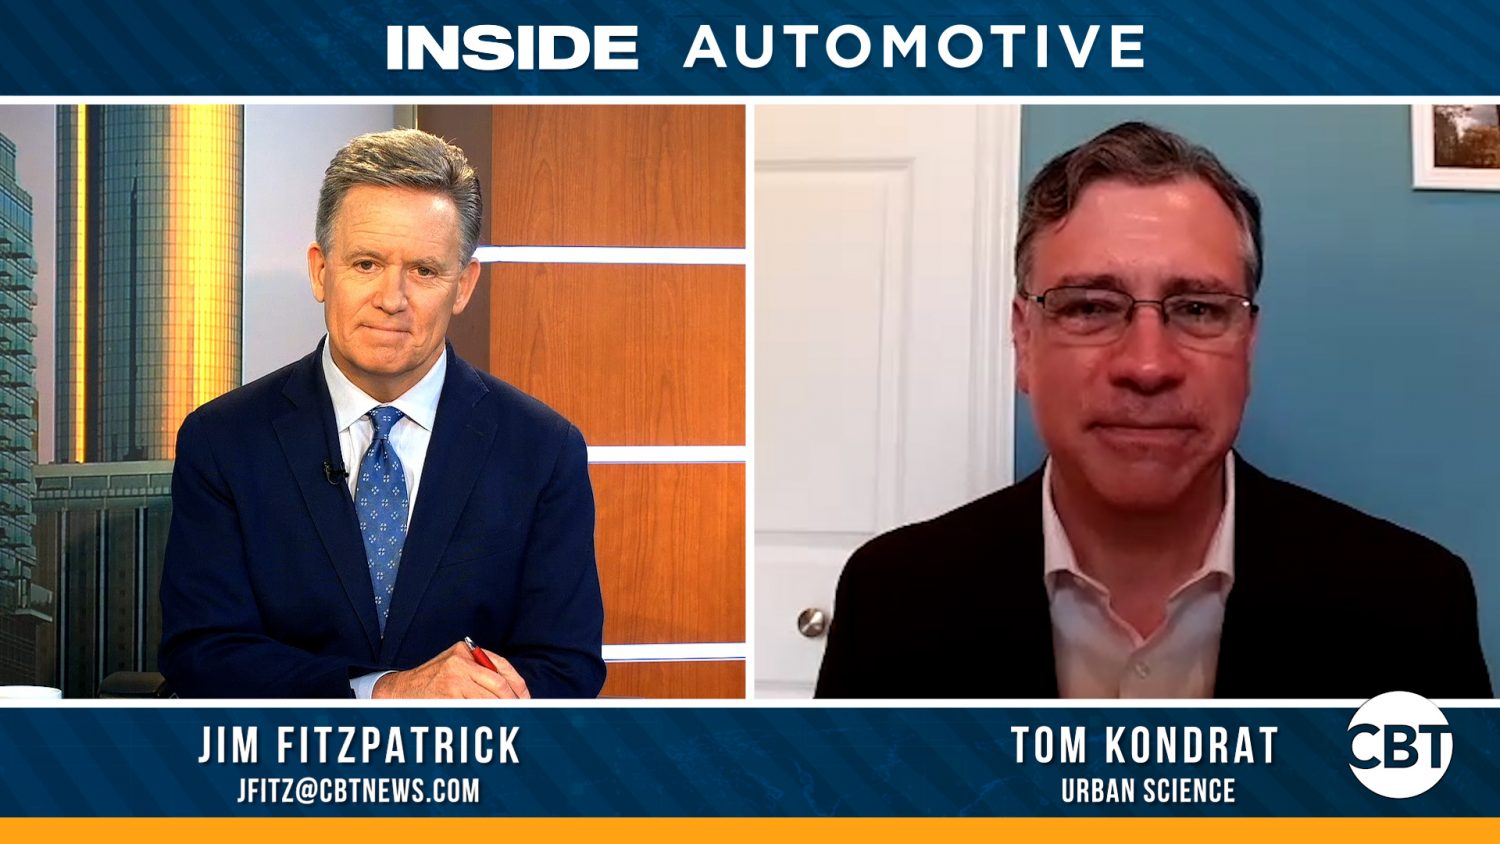 Hybrids are taking center stage. In today's episode of Inside Automotive, we’re joined by Tom Kondrat, to share the latest Urban Science study